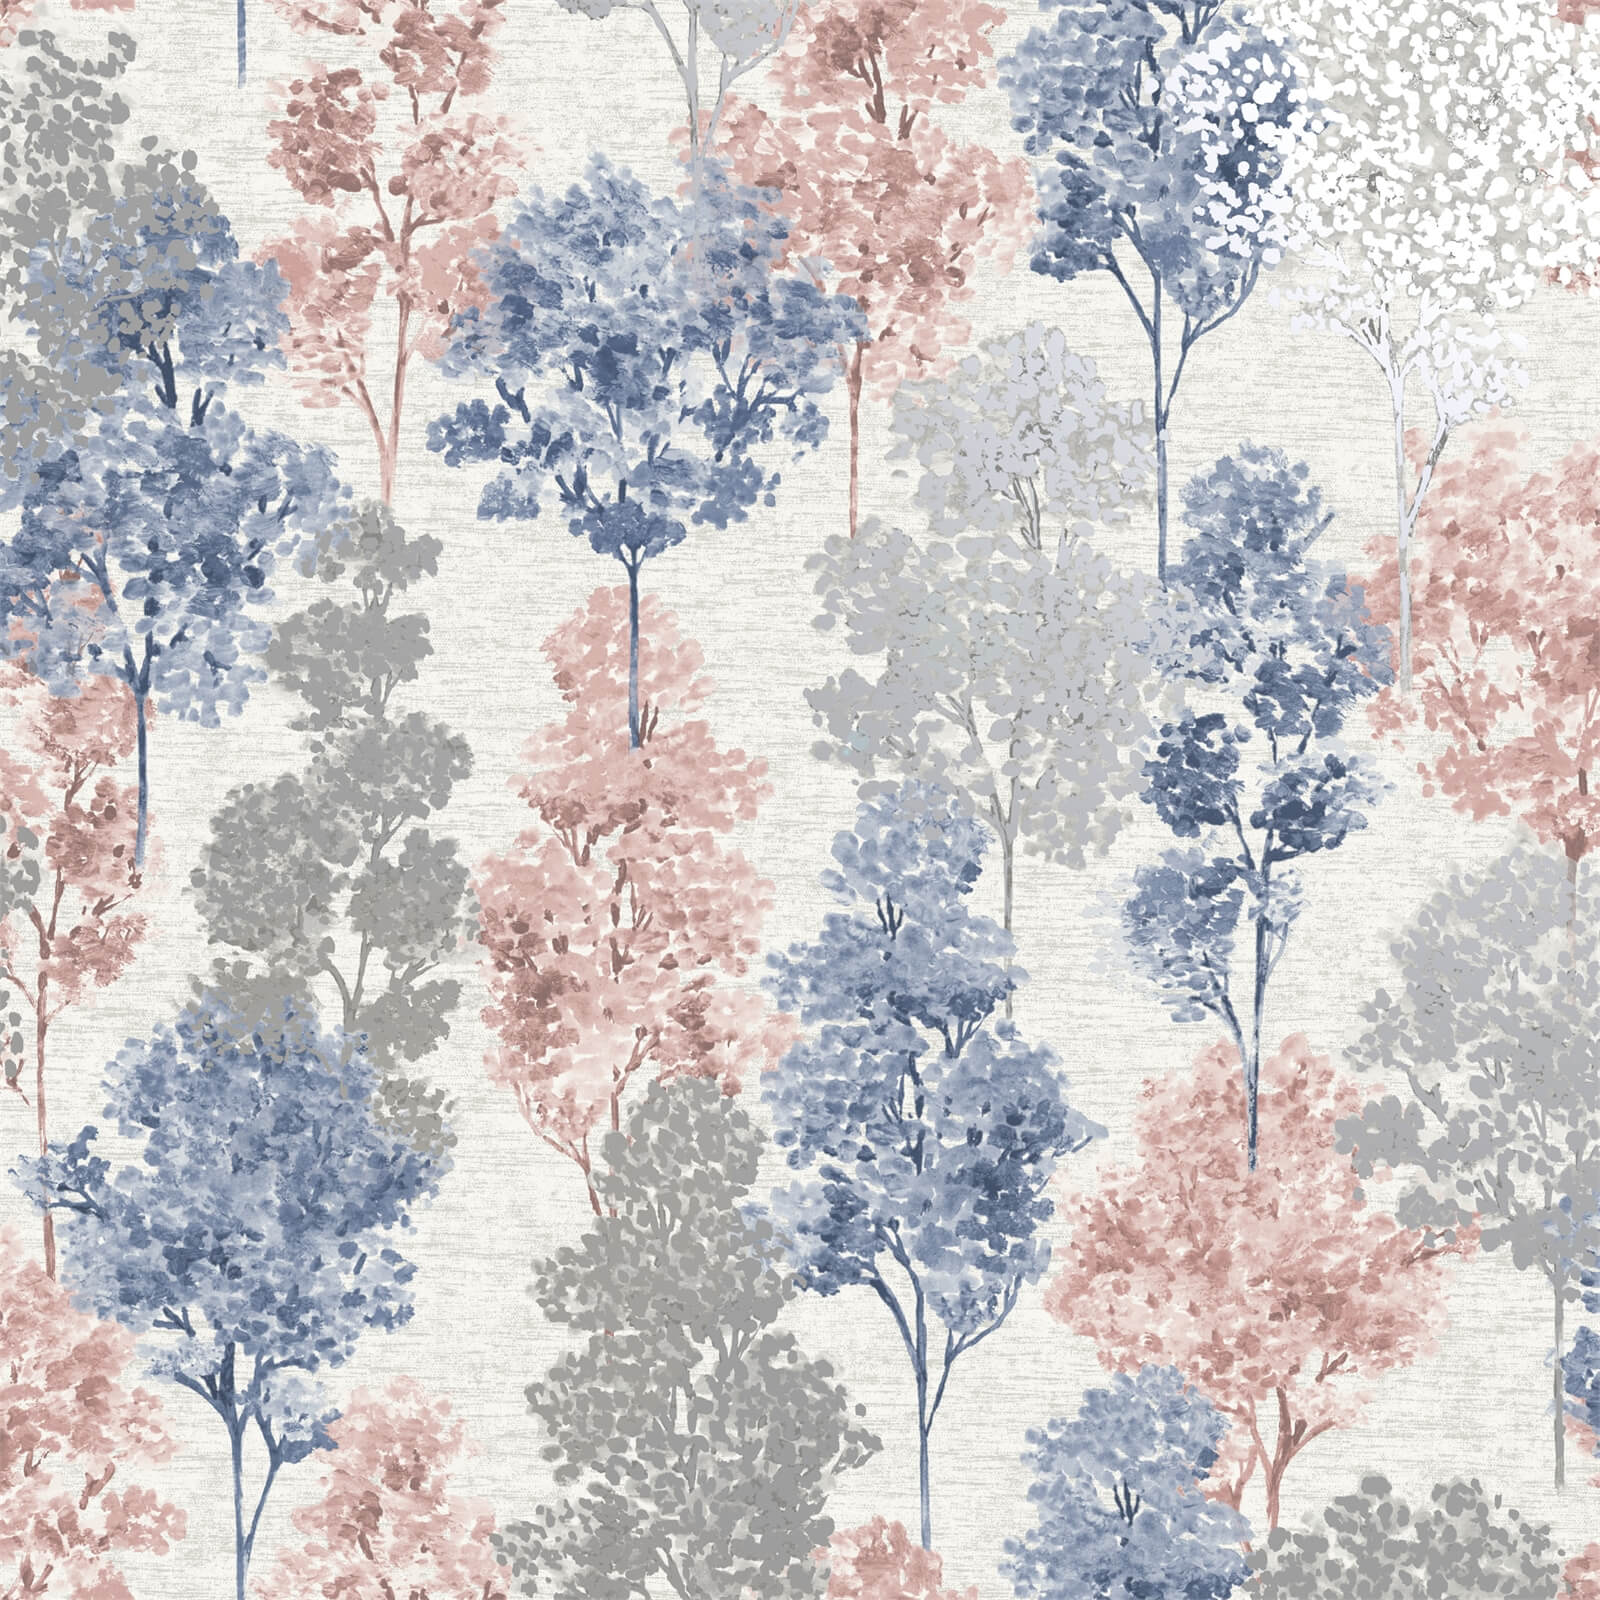 Holden Decor Whinfell Tree Textured Metallic Navy and Coral Wallpaper